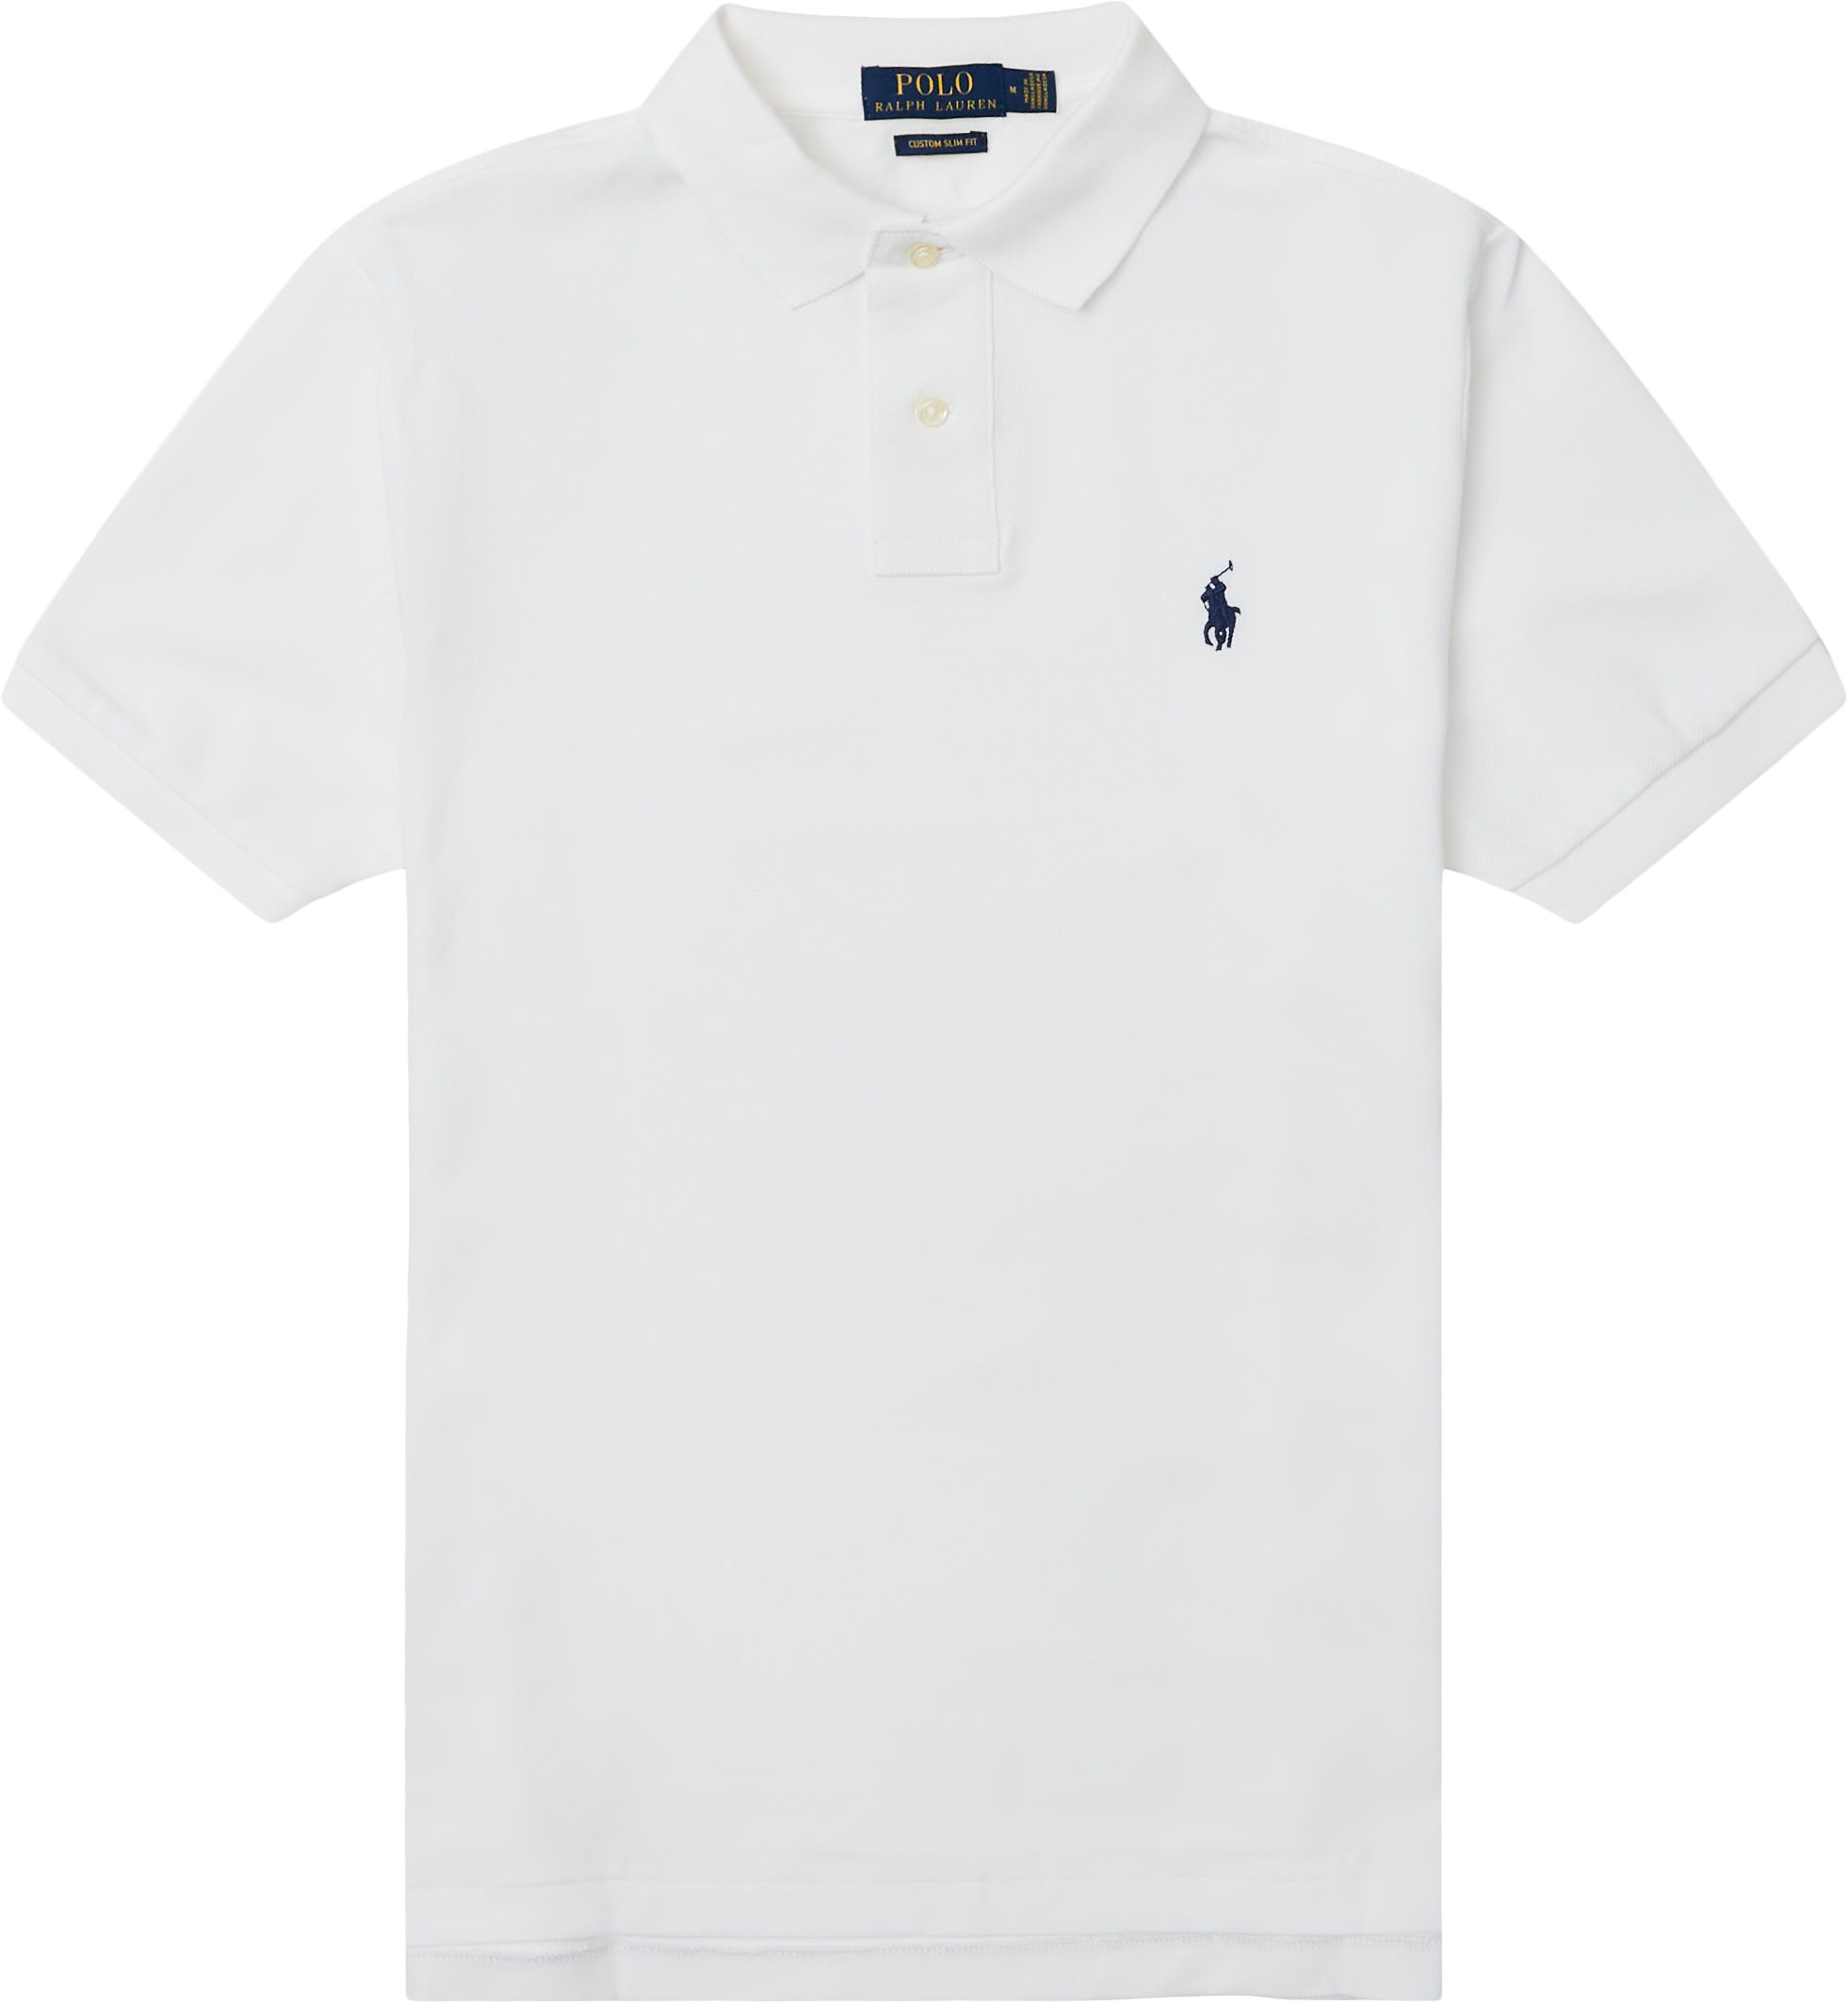 710666998 Polo Tee - T-shirts - Regular fit - White